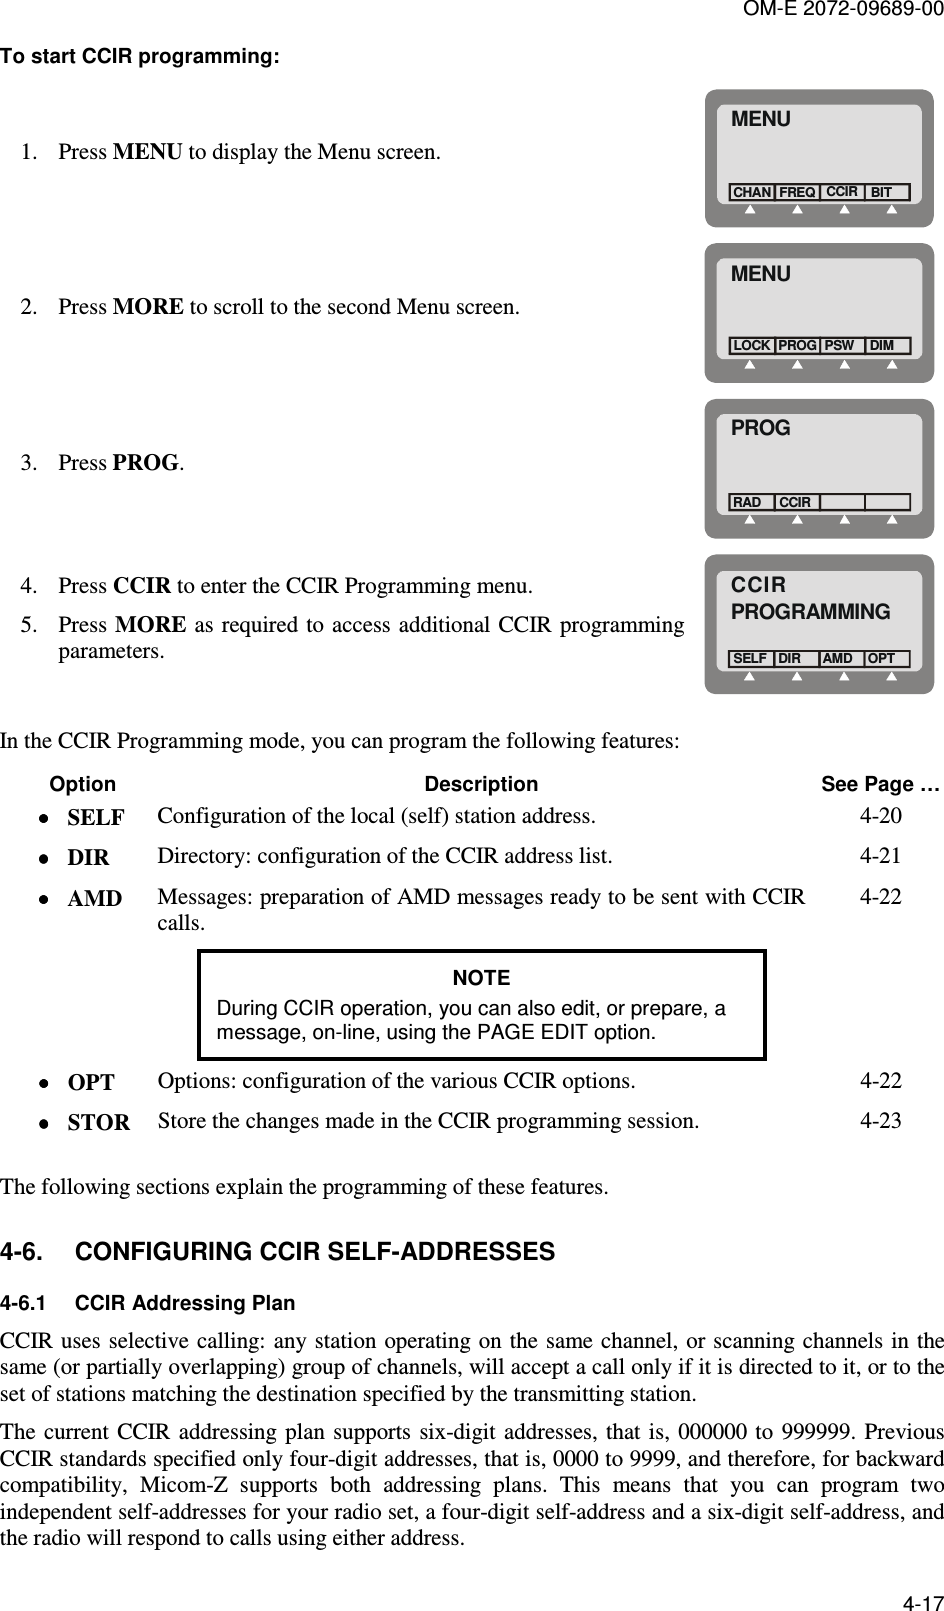 OM-E 2072-09689-00 4-17 To start CCIR programming: 1. Press MENU to display the Menu screen. MENUFREQCHANCCIRBIT 2. Press MORE to scroll to the second Menu screen. MENUPROGLOCK PSWDIM 3. Press PROG.  PROGCCIRRAD 4. Press CCIR to enter the CCIR Programming menu. 5. Press MORE as required to access additional CCIR programming parameters. CCIRPROGRAMMINGDIRSELFOPTAMD  In the CCIR Programming mode, you can program the following features: Option  Description  See Page … •••• SELF  Configuration of the local (self) station address.  4-20 •••• DIR  Directory: configuration of the CCIR address list.  4-21 •••• AMD  Messages: preparation of AMD messages ready to be sent with CCIR calls. NOTE During CCIR operation, you can also edit, or prepare, a message, on-line, using the PAGE EDIT option. 4-22 •••• OPT  Options: configuration of the various CCIR options.  4-22 •••• STOR  Store the changes made in the CCIR programming session.  4-23  The following sections explain the programming of these features.  4-6.  CONFIGURING CCIR SELF-ADDRESSES 4-6.1  CCIR Addressing Plan CCIR uses selective calling: any station operating on the same channel, or scanning channels in the same (or partially overlapping) group of channels, will accept a call only if it is directed to it, or to the set of stations matching the destination specified by the transmitting station. The  current CCIR addressing  plan  supports six-digit  addresses, that is, 000000 to  999999. Previous CCIR standards specified only four-digit addresses, that is, 0000 to 9999, and therefore, for backward compatibility,  Micom-Z  supports  both  addressing  plans.  This  means  that  you  can  program  two independent self-addresses for your radio set, a four-digit self-address and a six-digit self-address, and the radio will respond to calls using either address. 